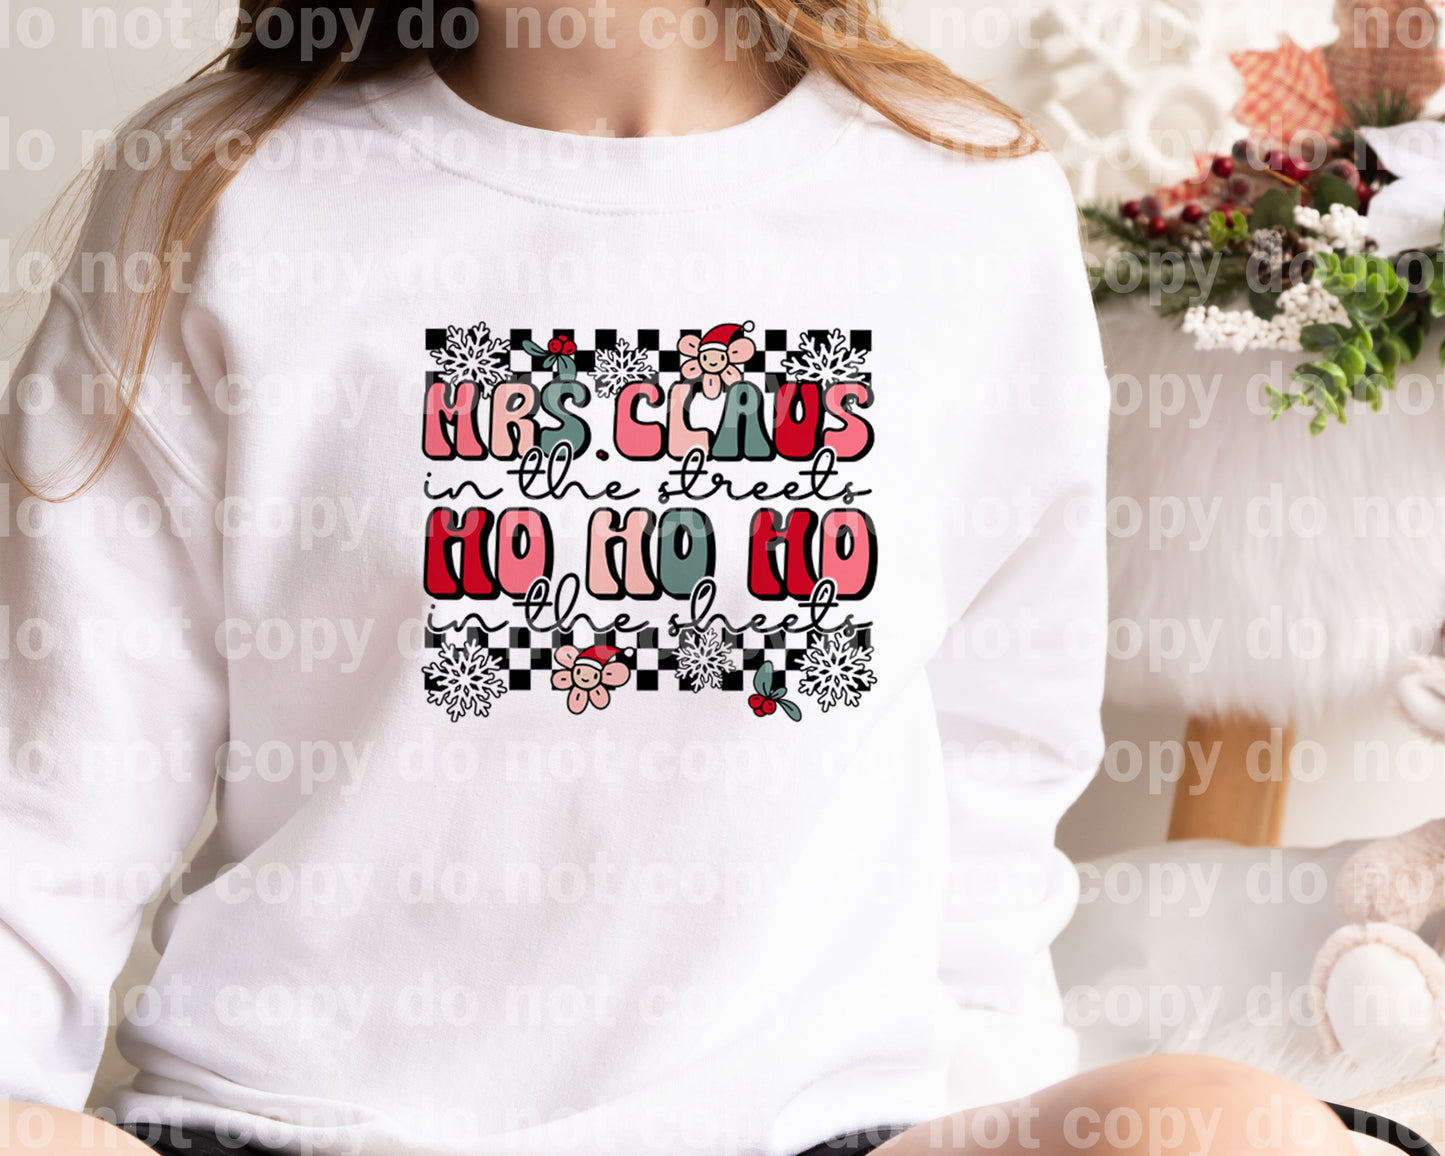 Mrs. Claus In The Streets Ho Ho Ho In The Sheets Dream Print or Sublimation Print